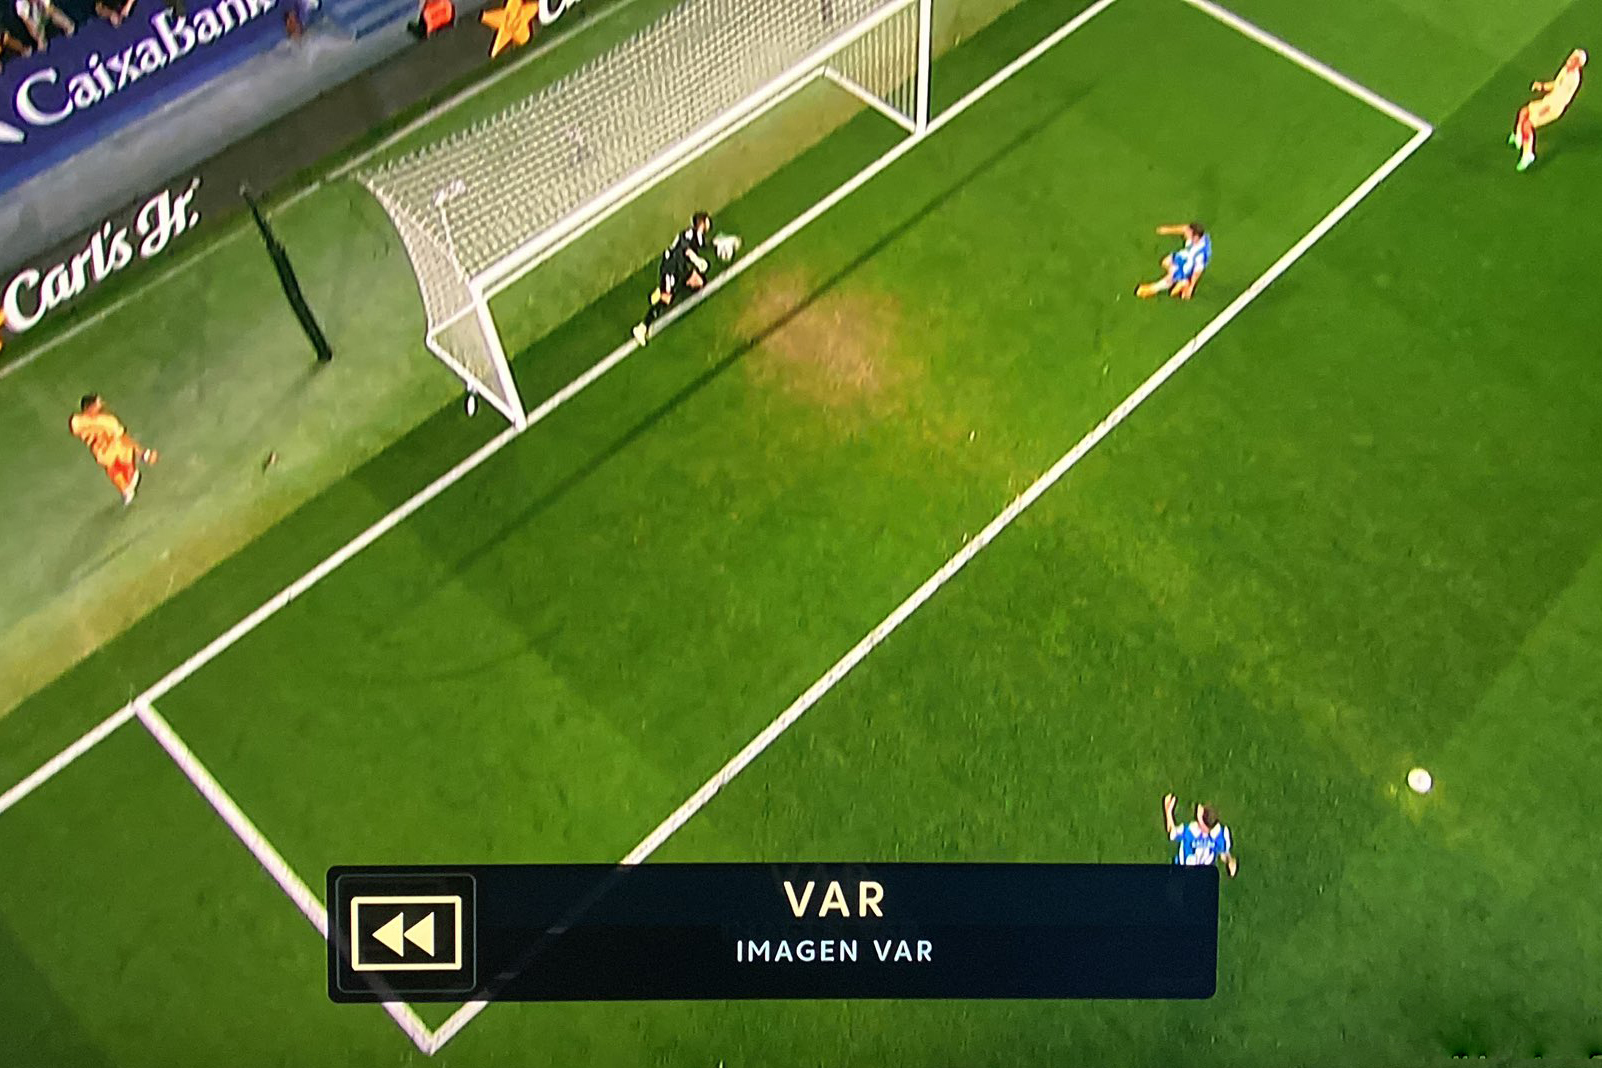 Image shown by VAR to award Griezmann 0-2.